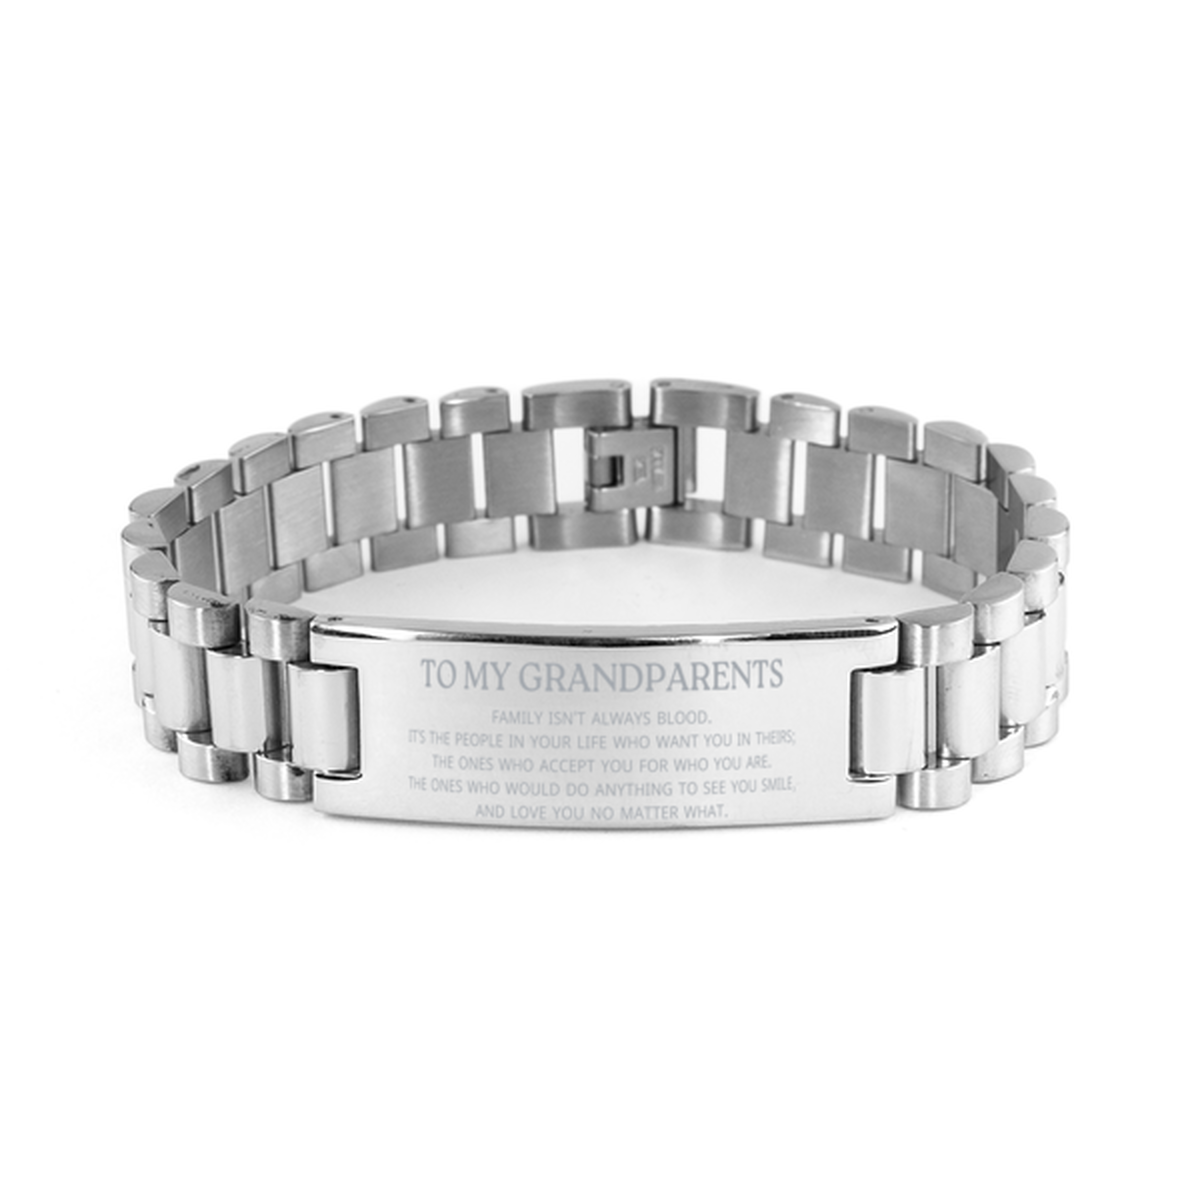 To My Grandparents Gifts, Family isn't always blood, Grandparents Ladder Stainless Steel Bracelet, Birthday Christmas Unique Present For Grandparents